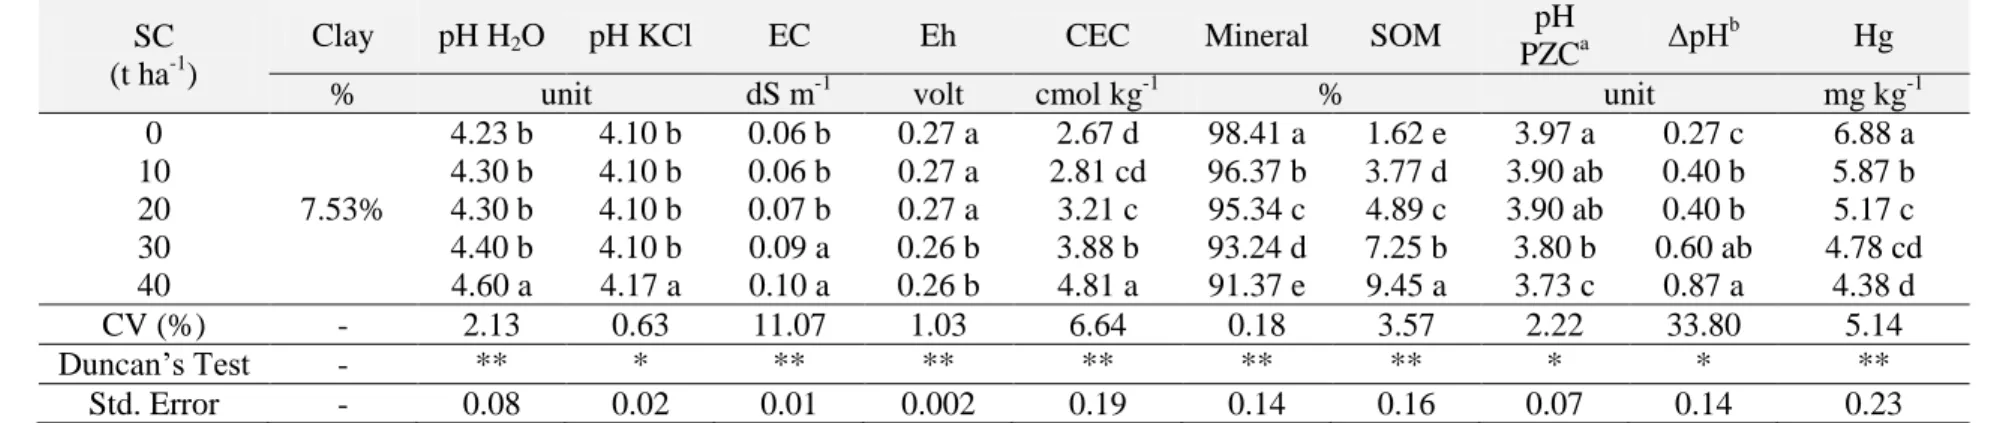 Table 5.1. Chemical characteristics of ex-gold mining soil ameliorated with sub-bituminous coal Indonesian  SC 